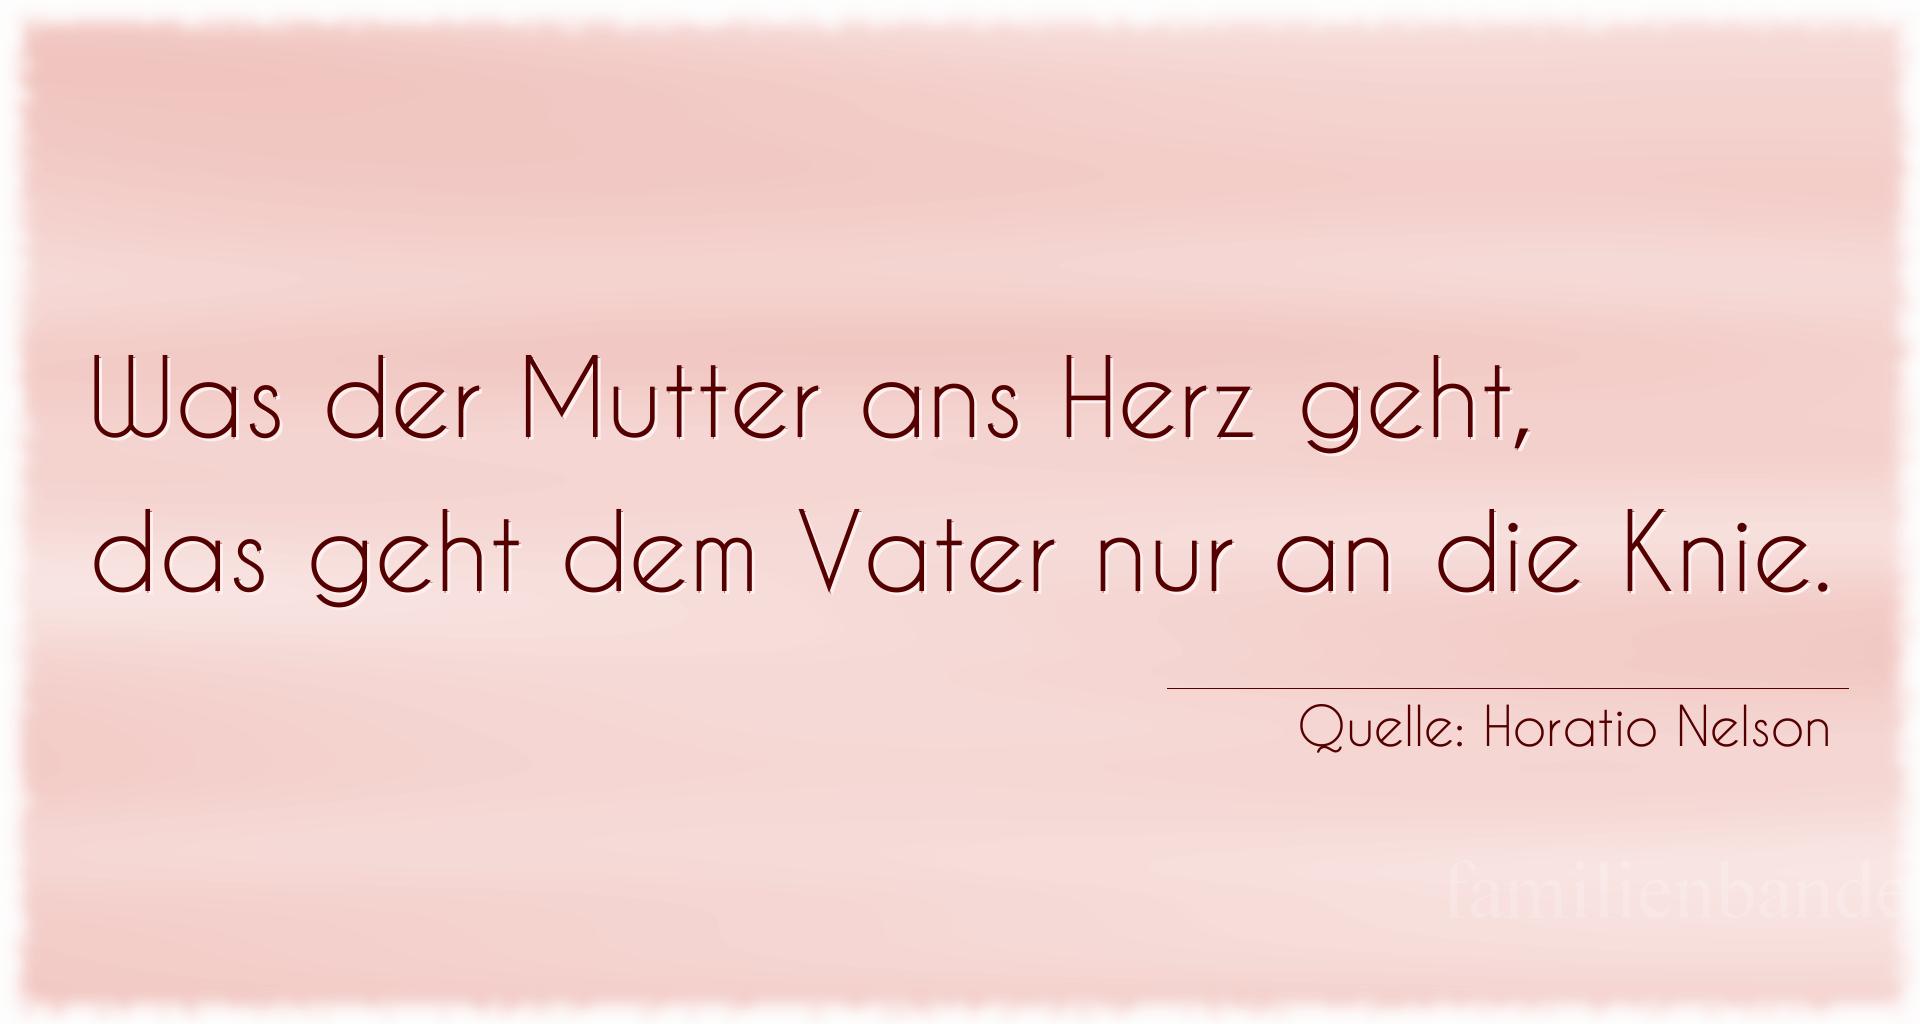 Familienspruch Nr. 361, Quelle Horatio Nelson